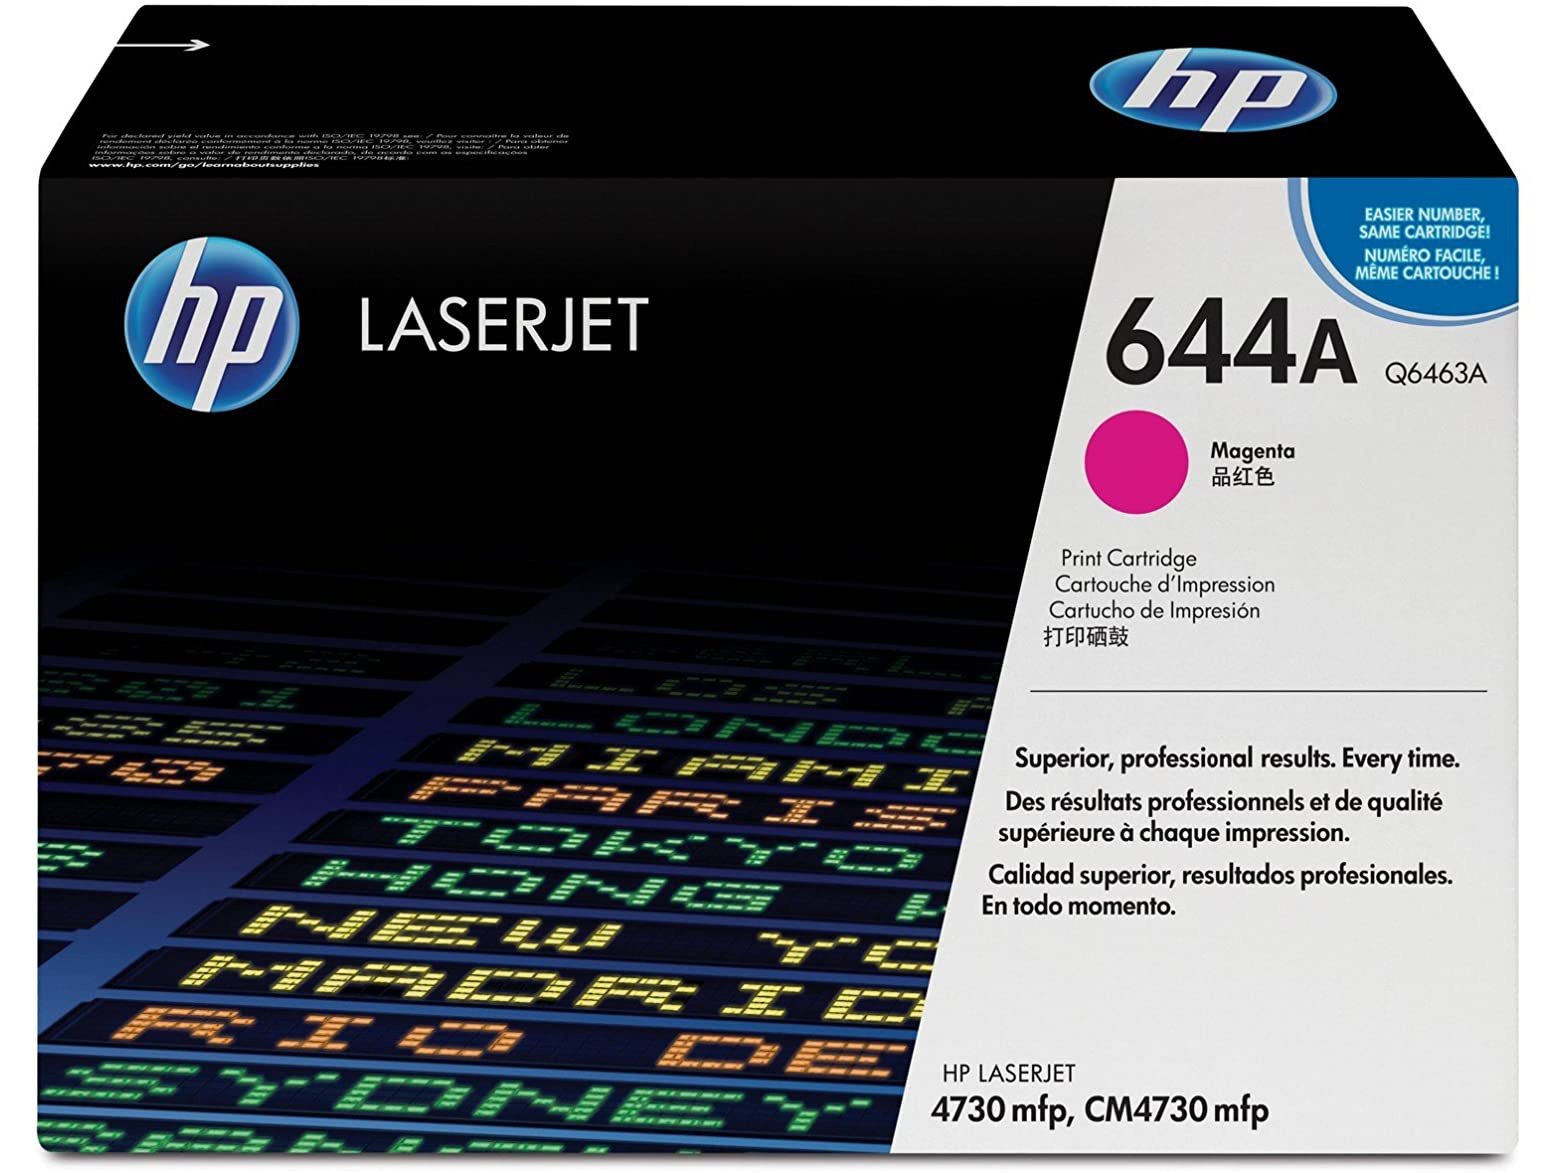 ICU Compatible/ OEM Get HP ICUQ6463A Yields 12,000 Pages 644A Magenta Laser Toner Cartridge